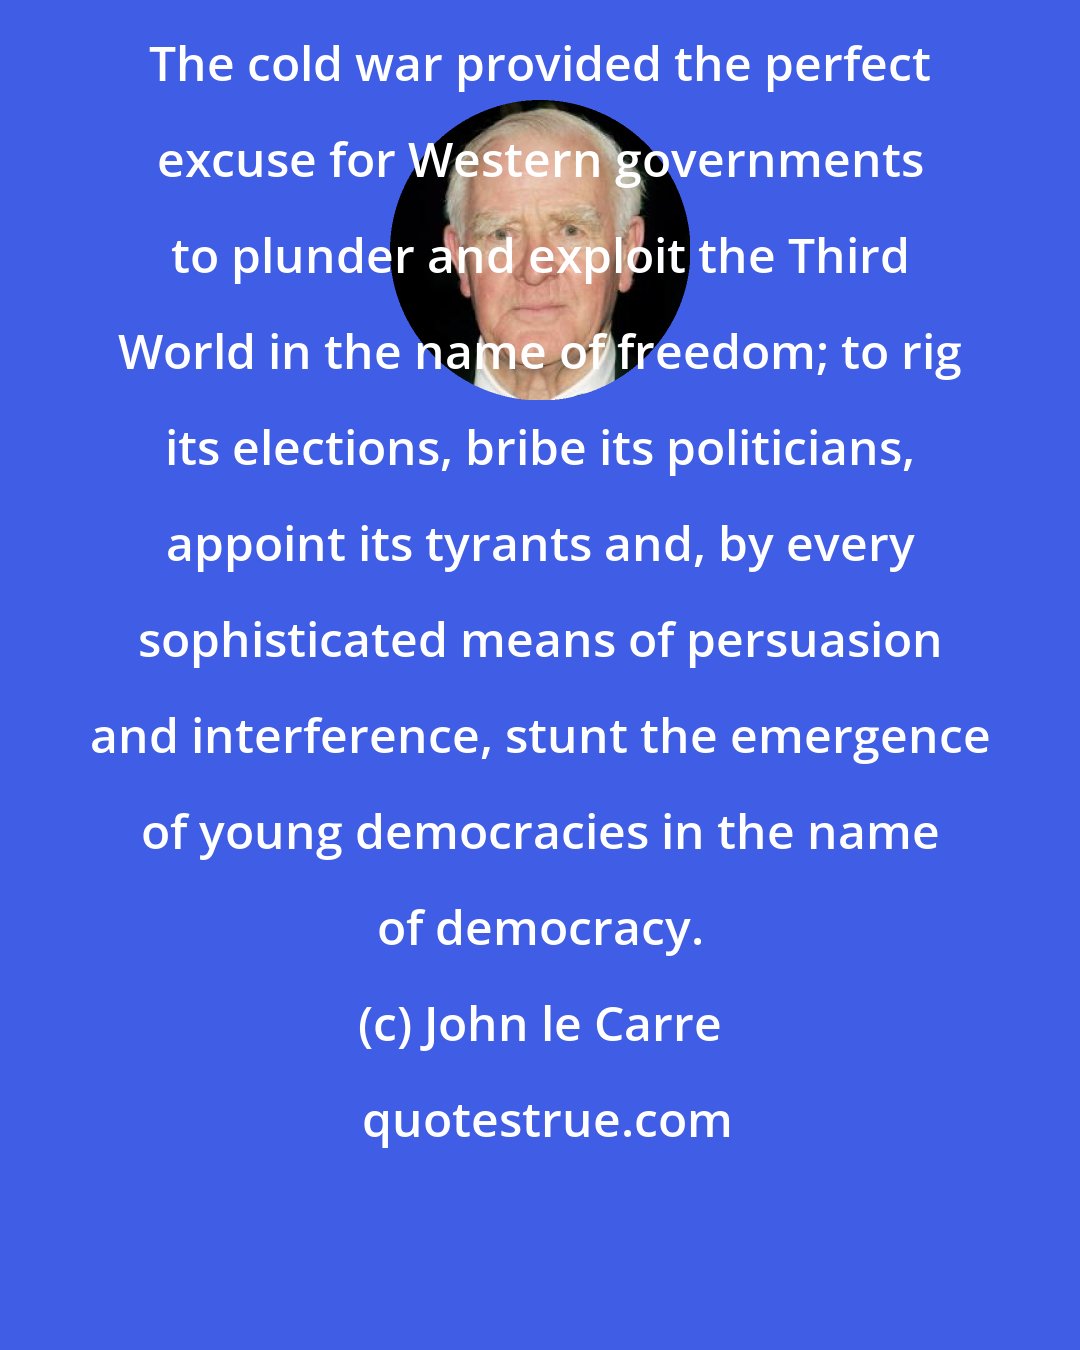 John le Carre: The cold war provided the perfect excuse for Western governments to plunder and exploit the Third World in the name of freedom; to rig its elections, bribe its politicians, appoint its tyrants and, by every sophisticated means of persuasion and interference, stunt the emergence of young democracies in the name of democracy.